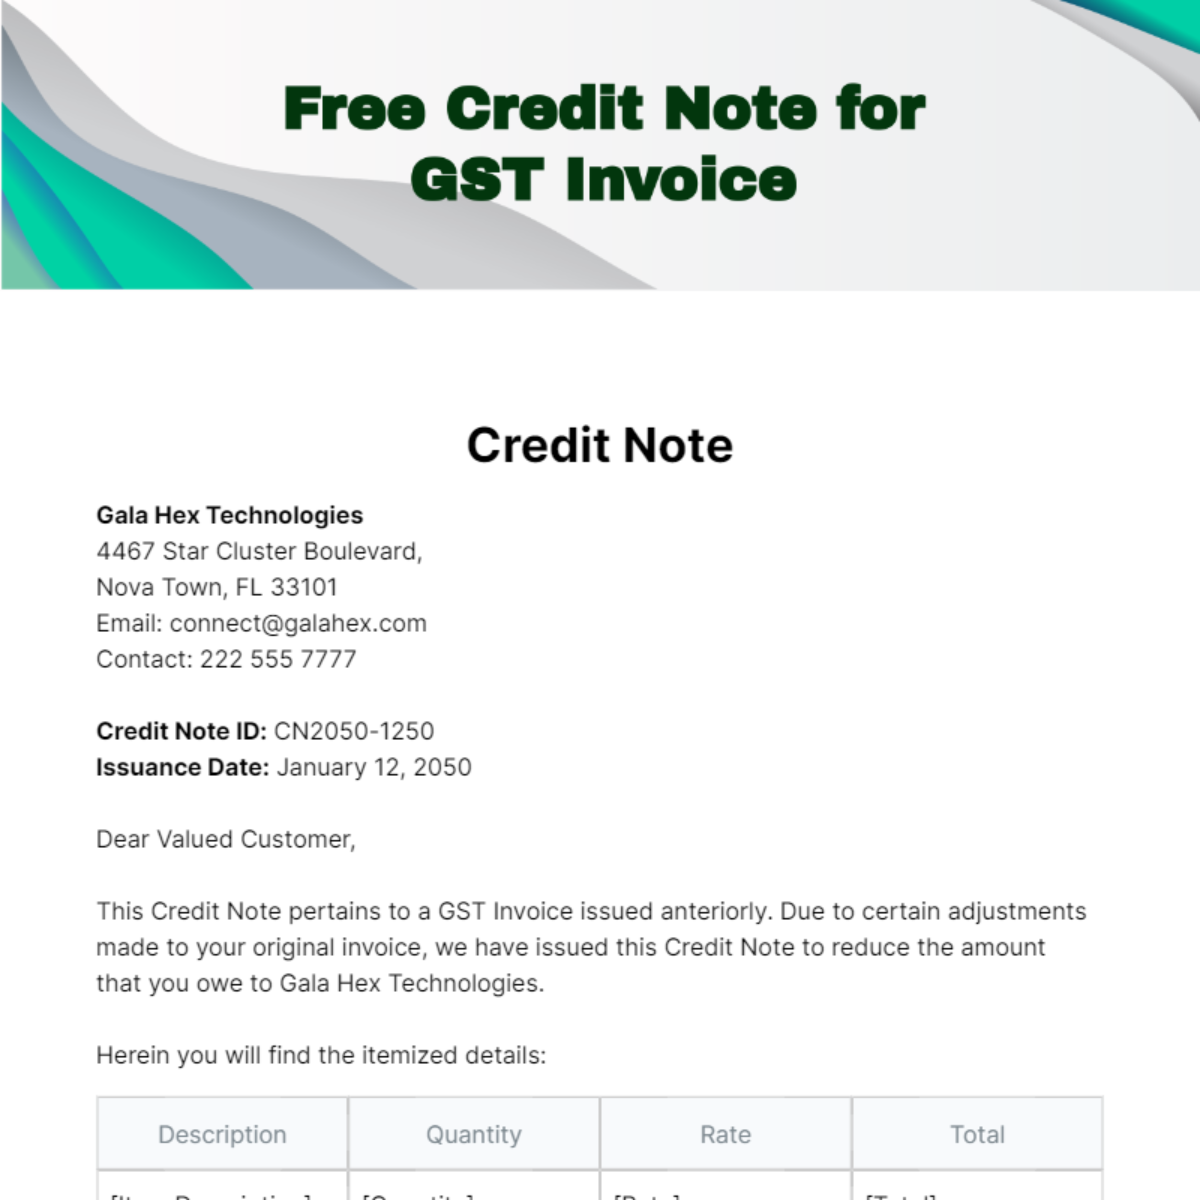 Credit Note for GST Invoice Template